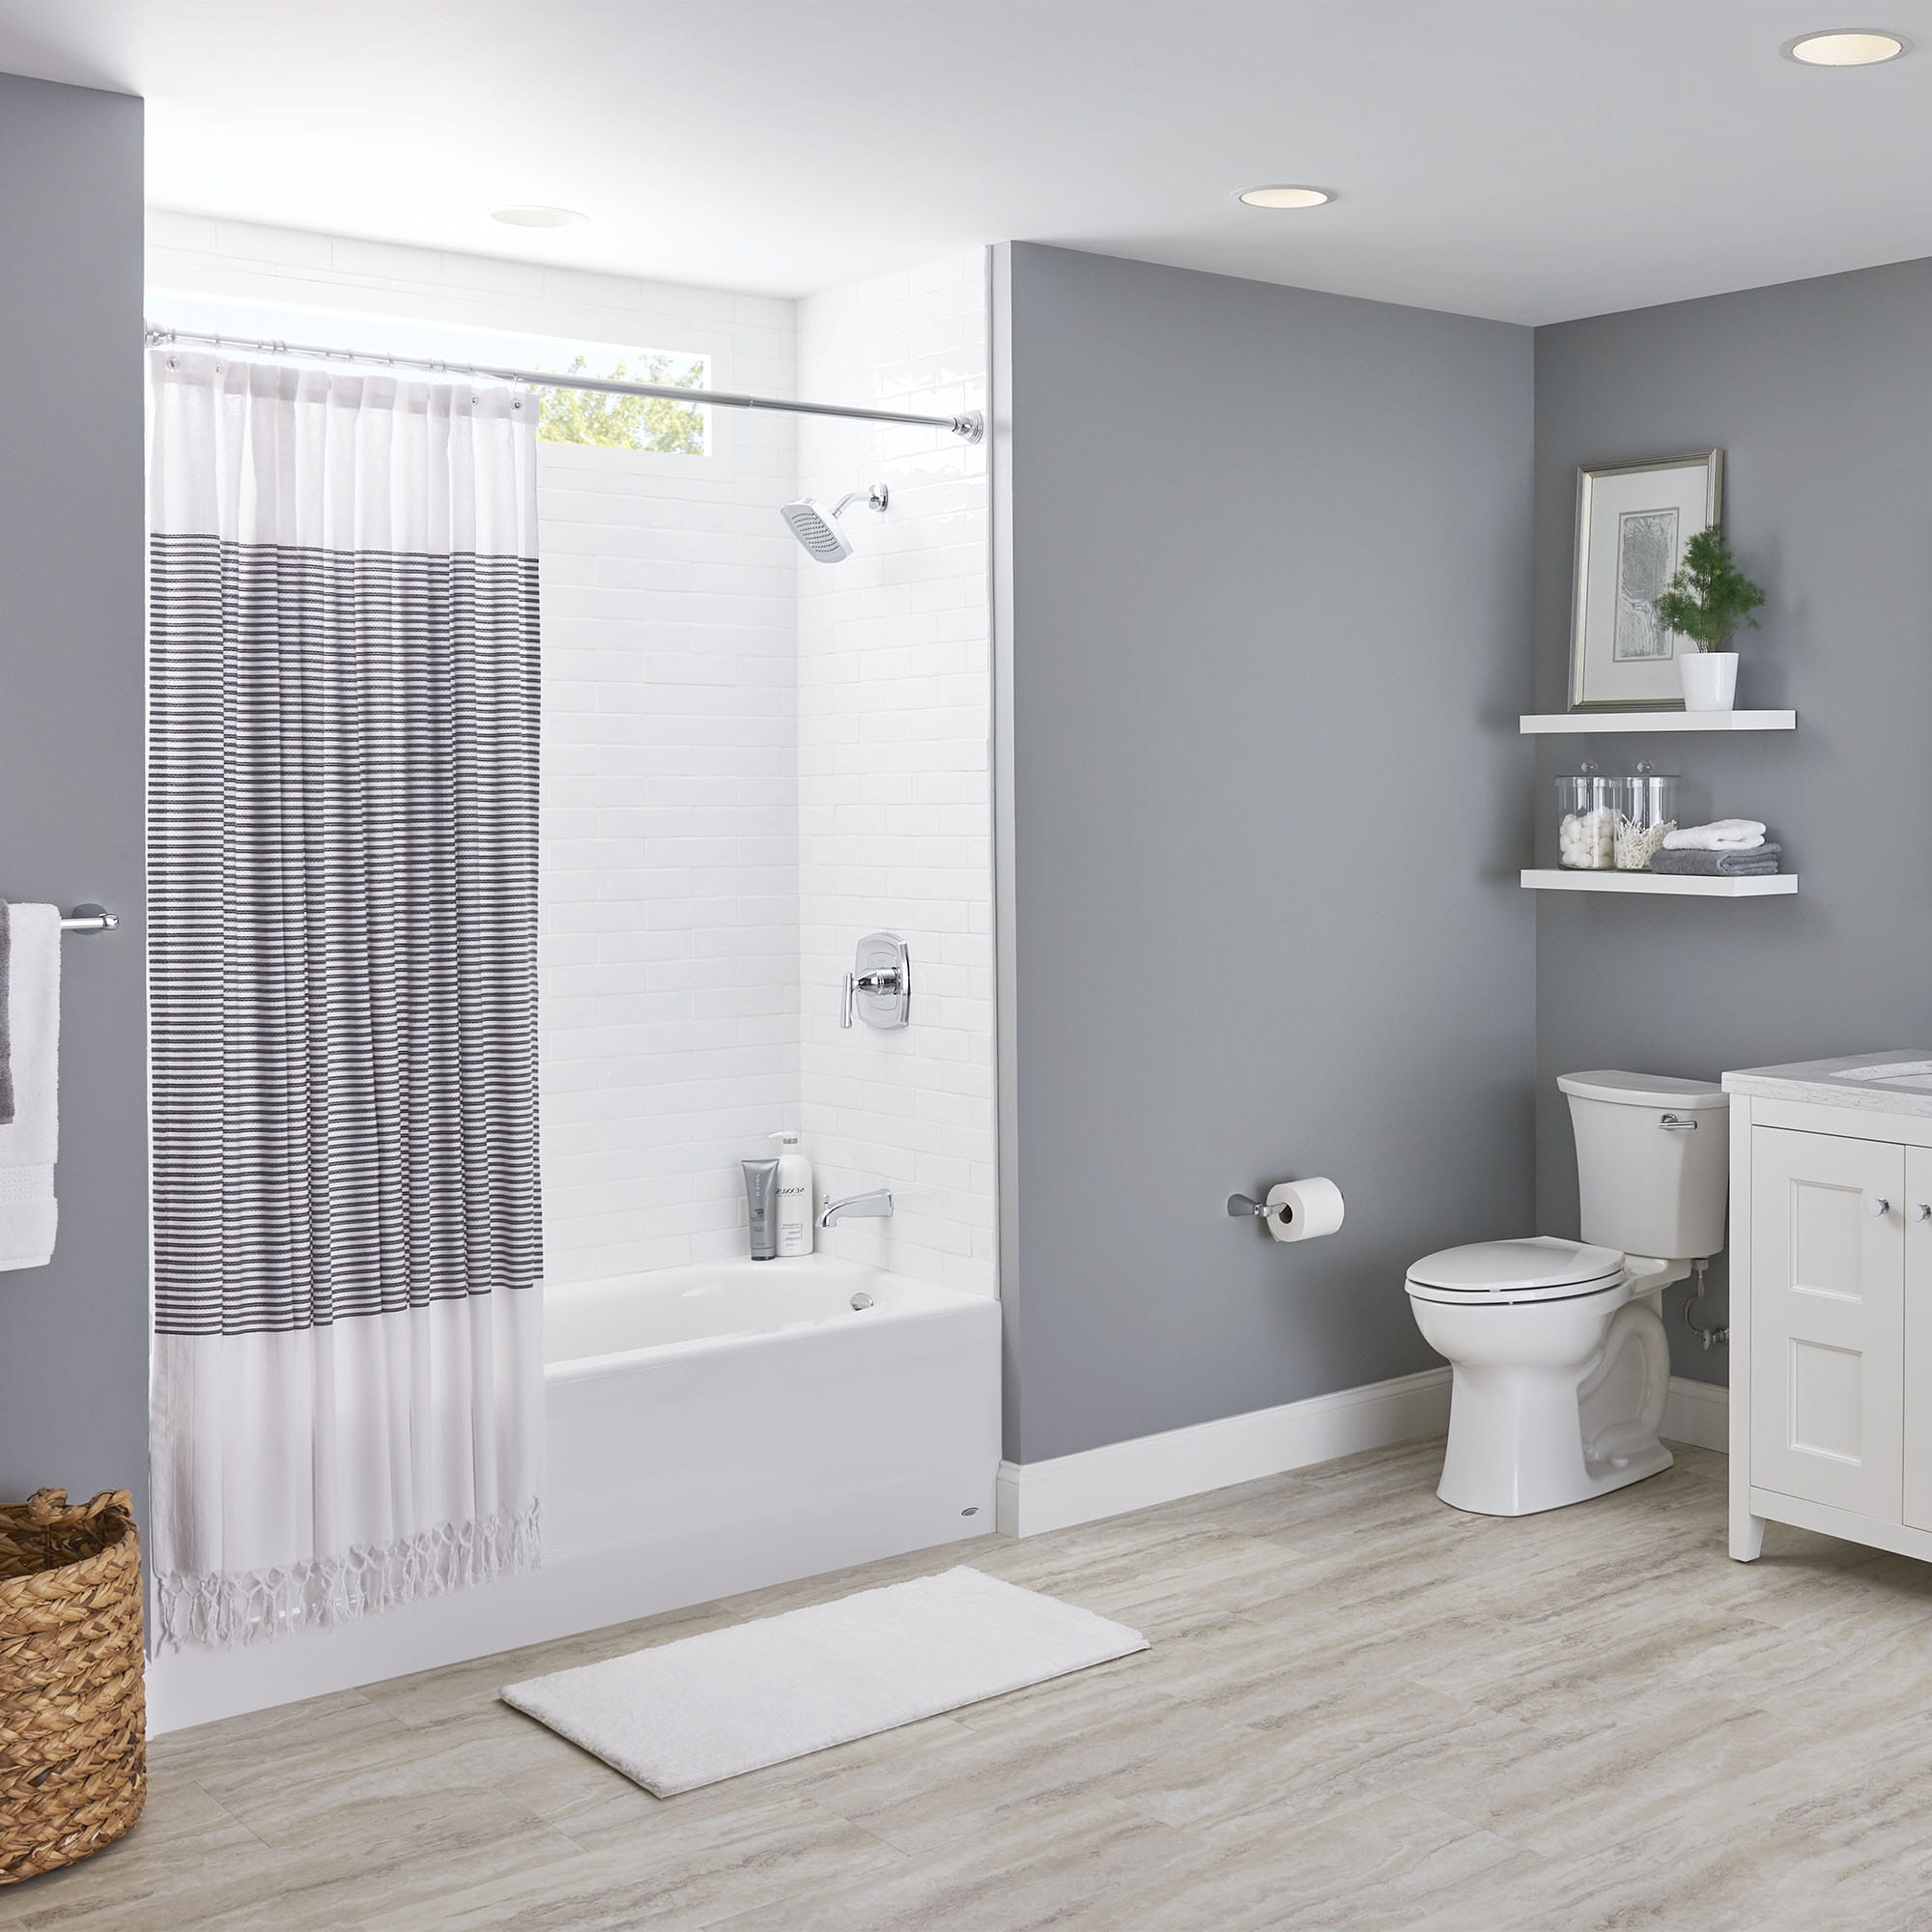 Princeton Americast 60 x 30 Inch Integral Apron Bathtub Above Floor Rough with Right Hand Outlet WHITE